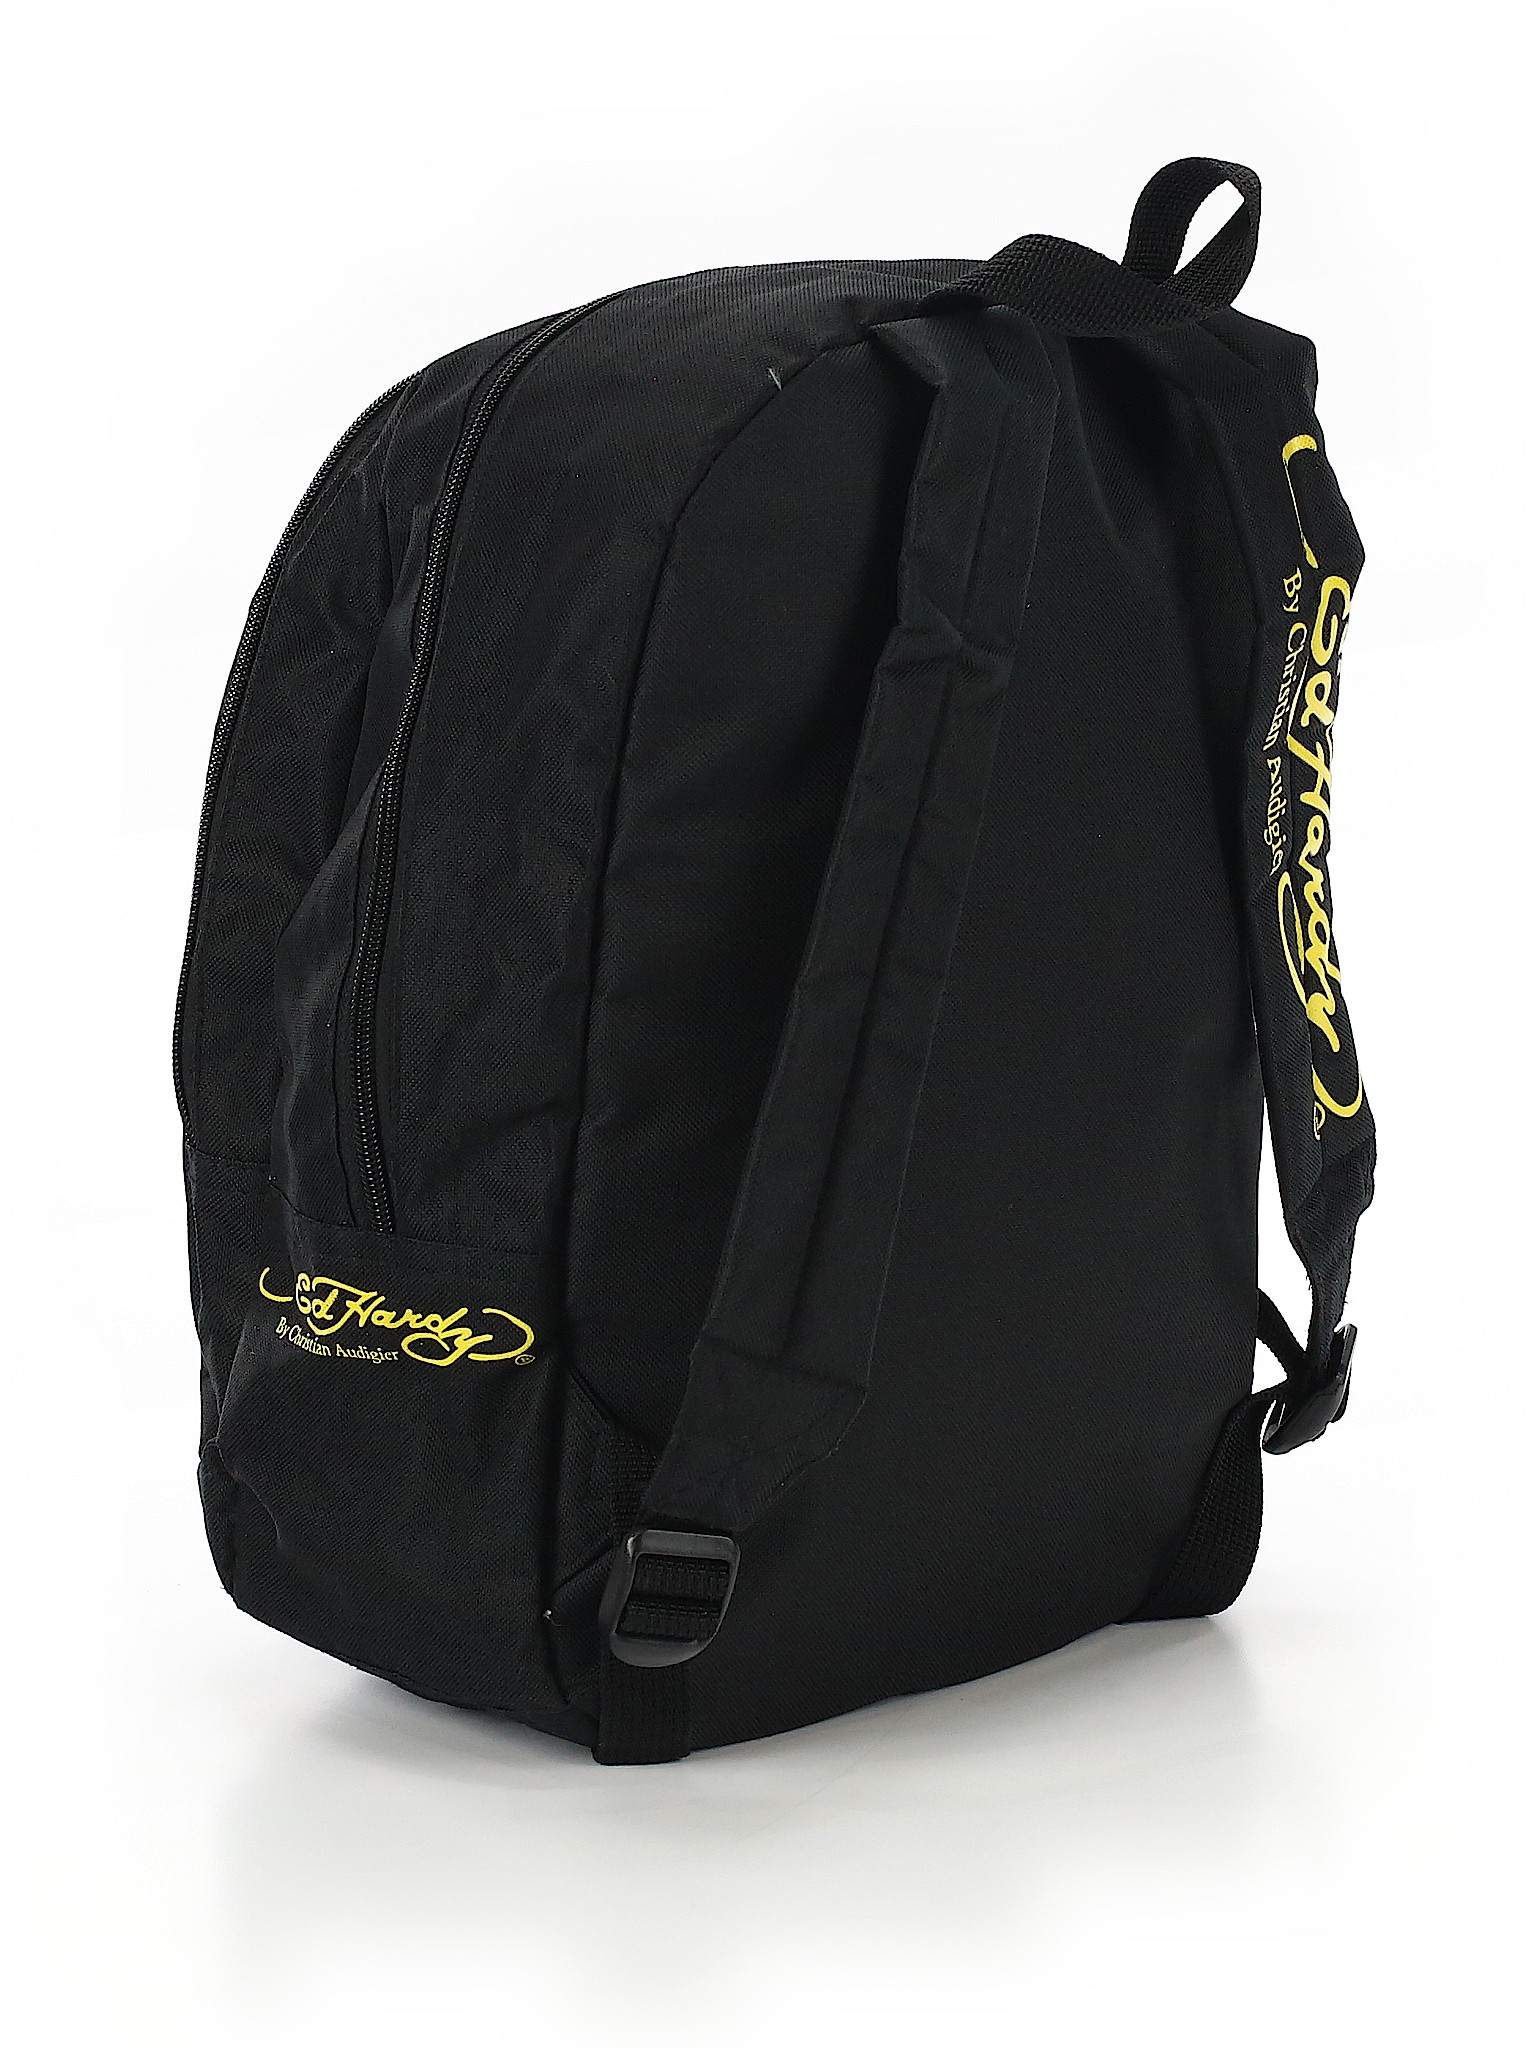 Ed Hardy Black Backpack One Size - 33% off